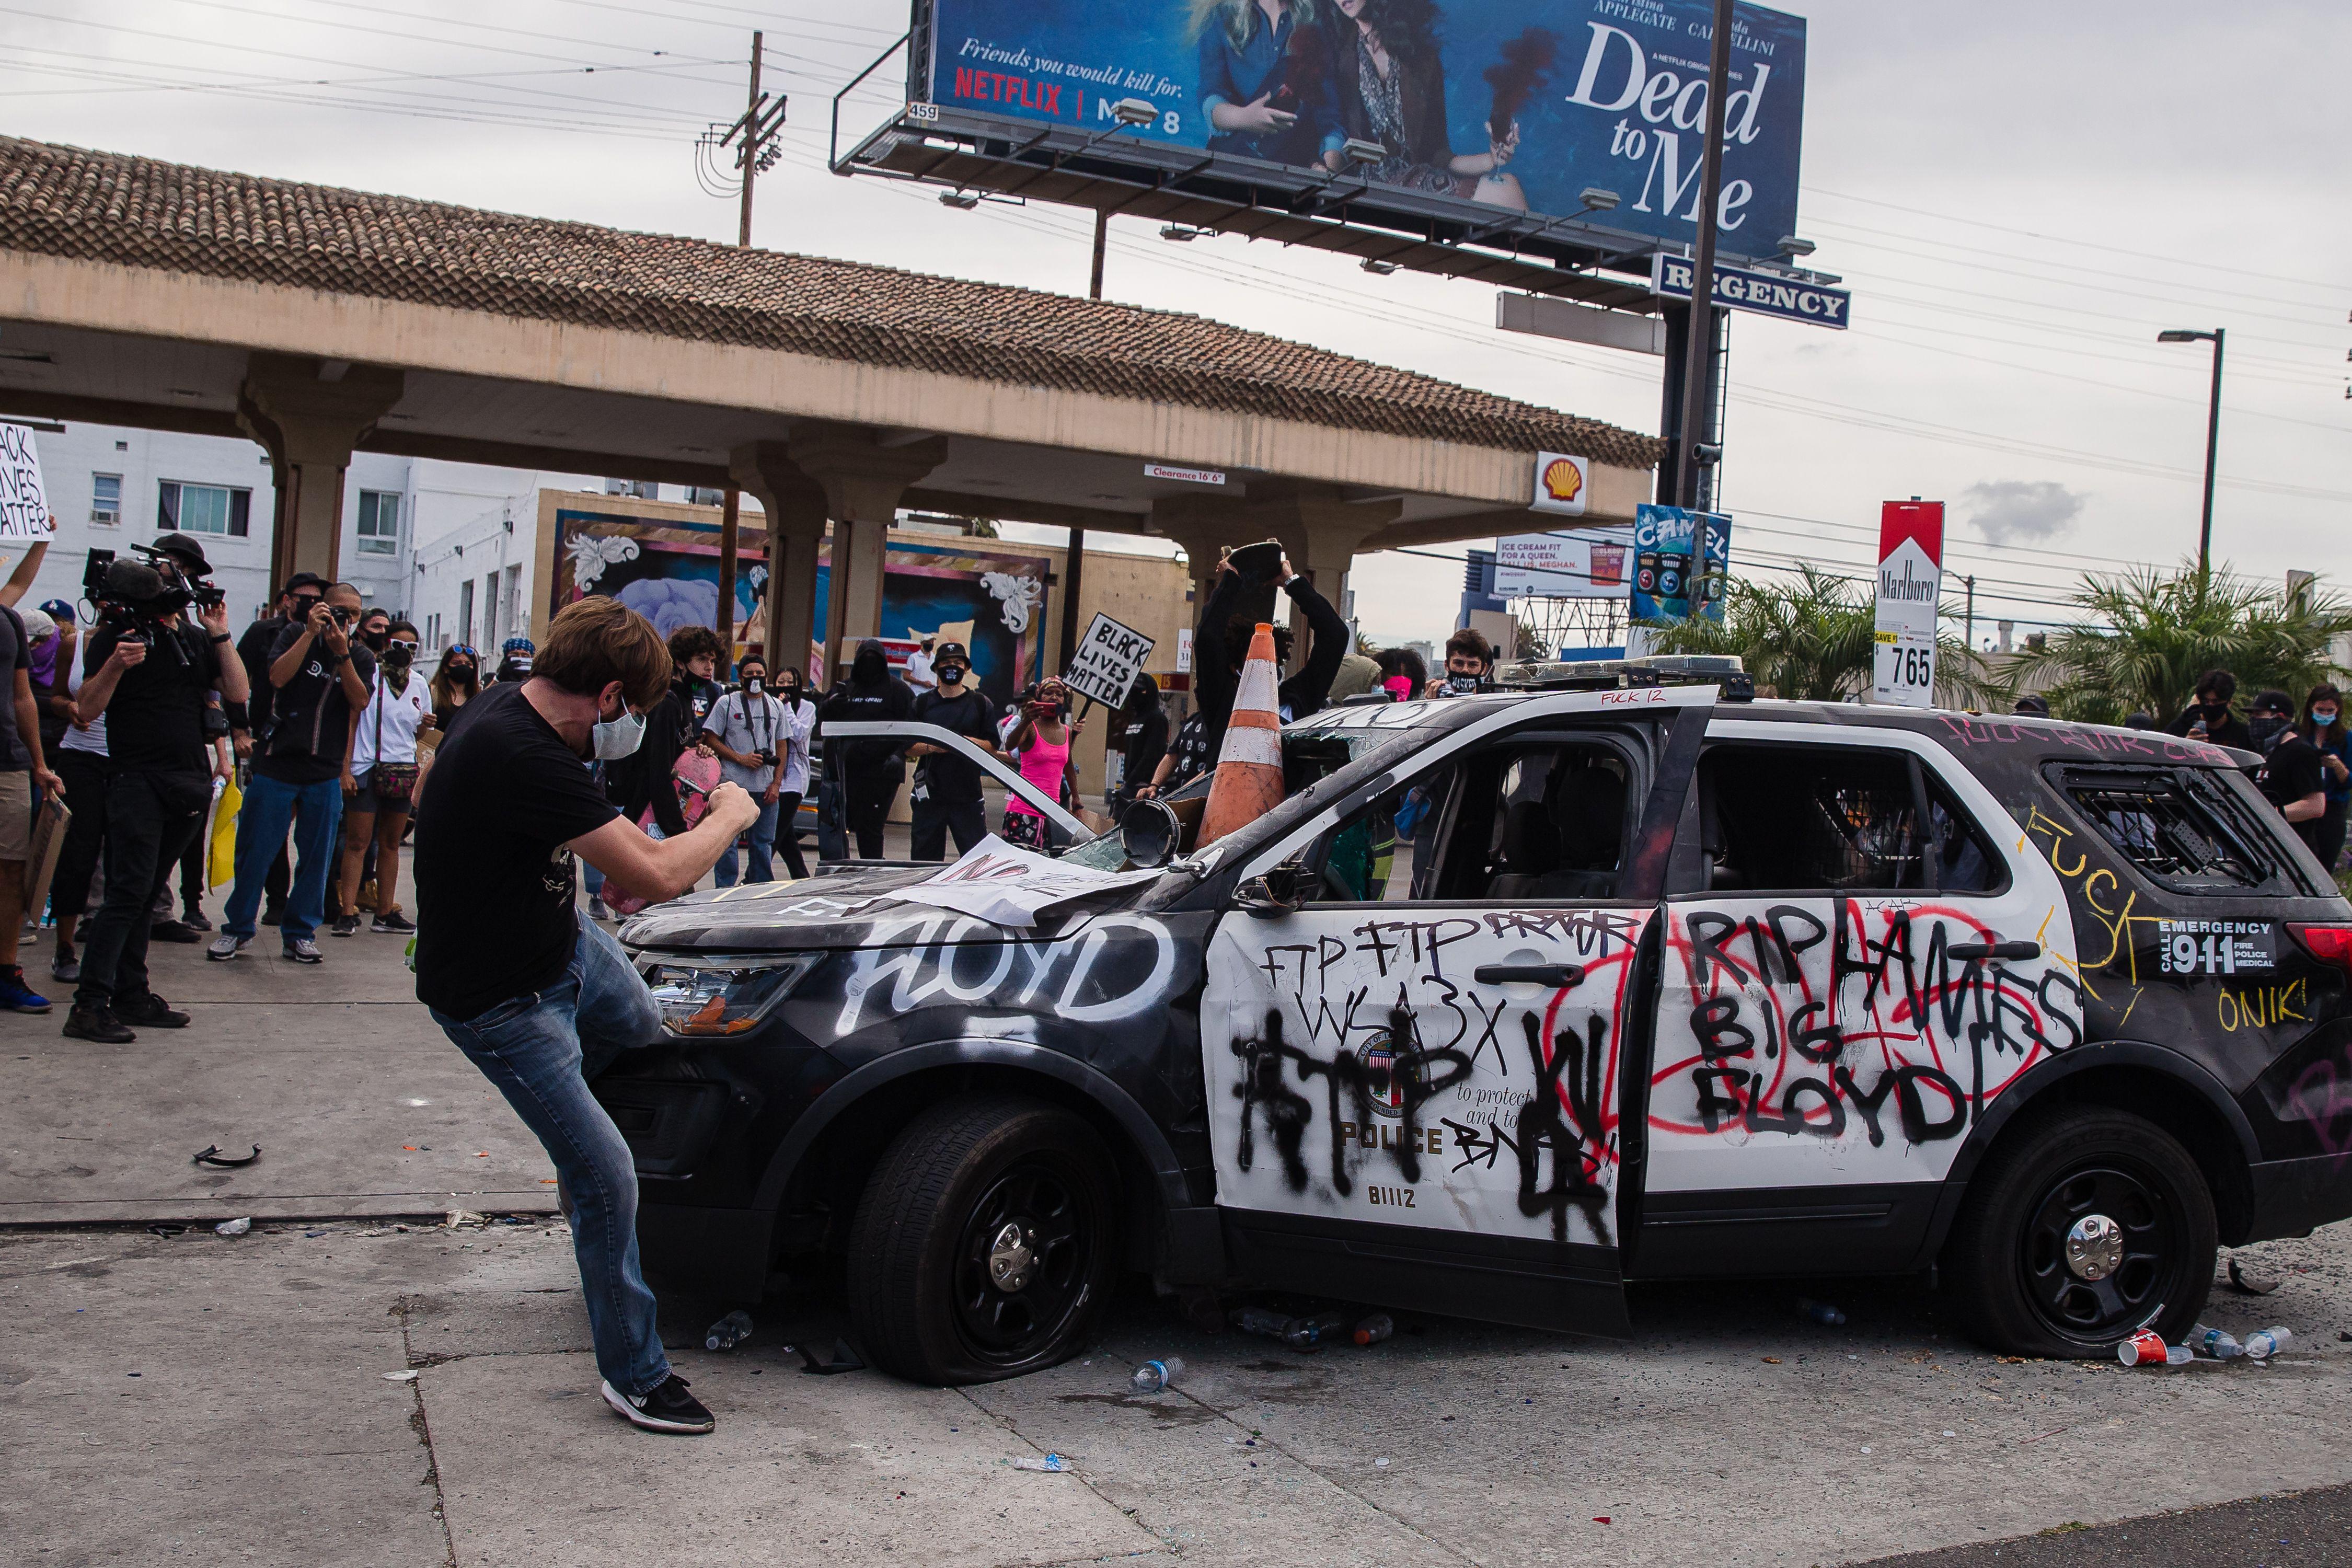 A demonstrator kicks a damaged police vehicle in Los Angeles on May 30, 2020.